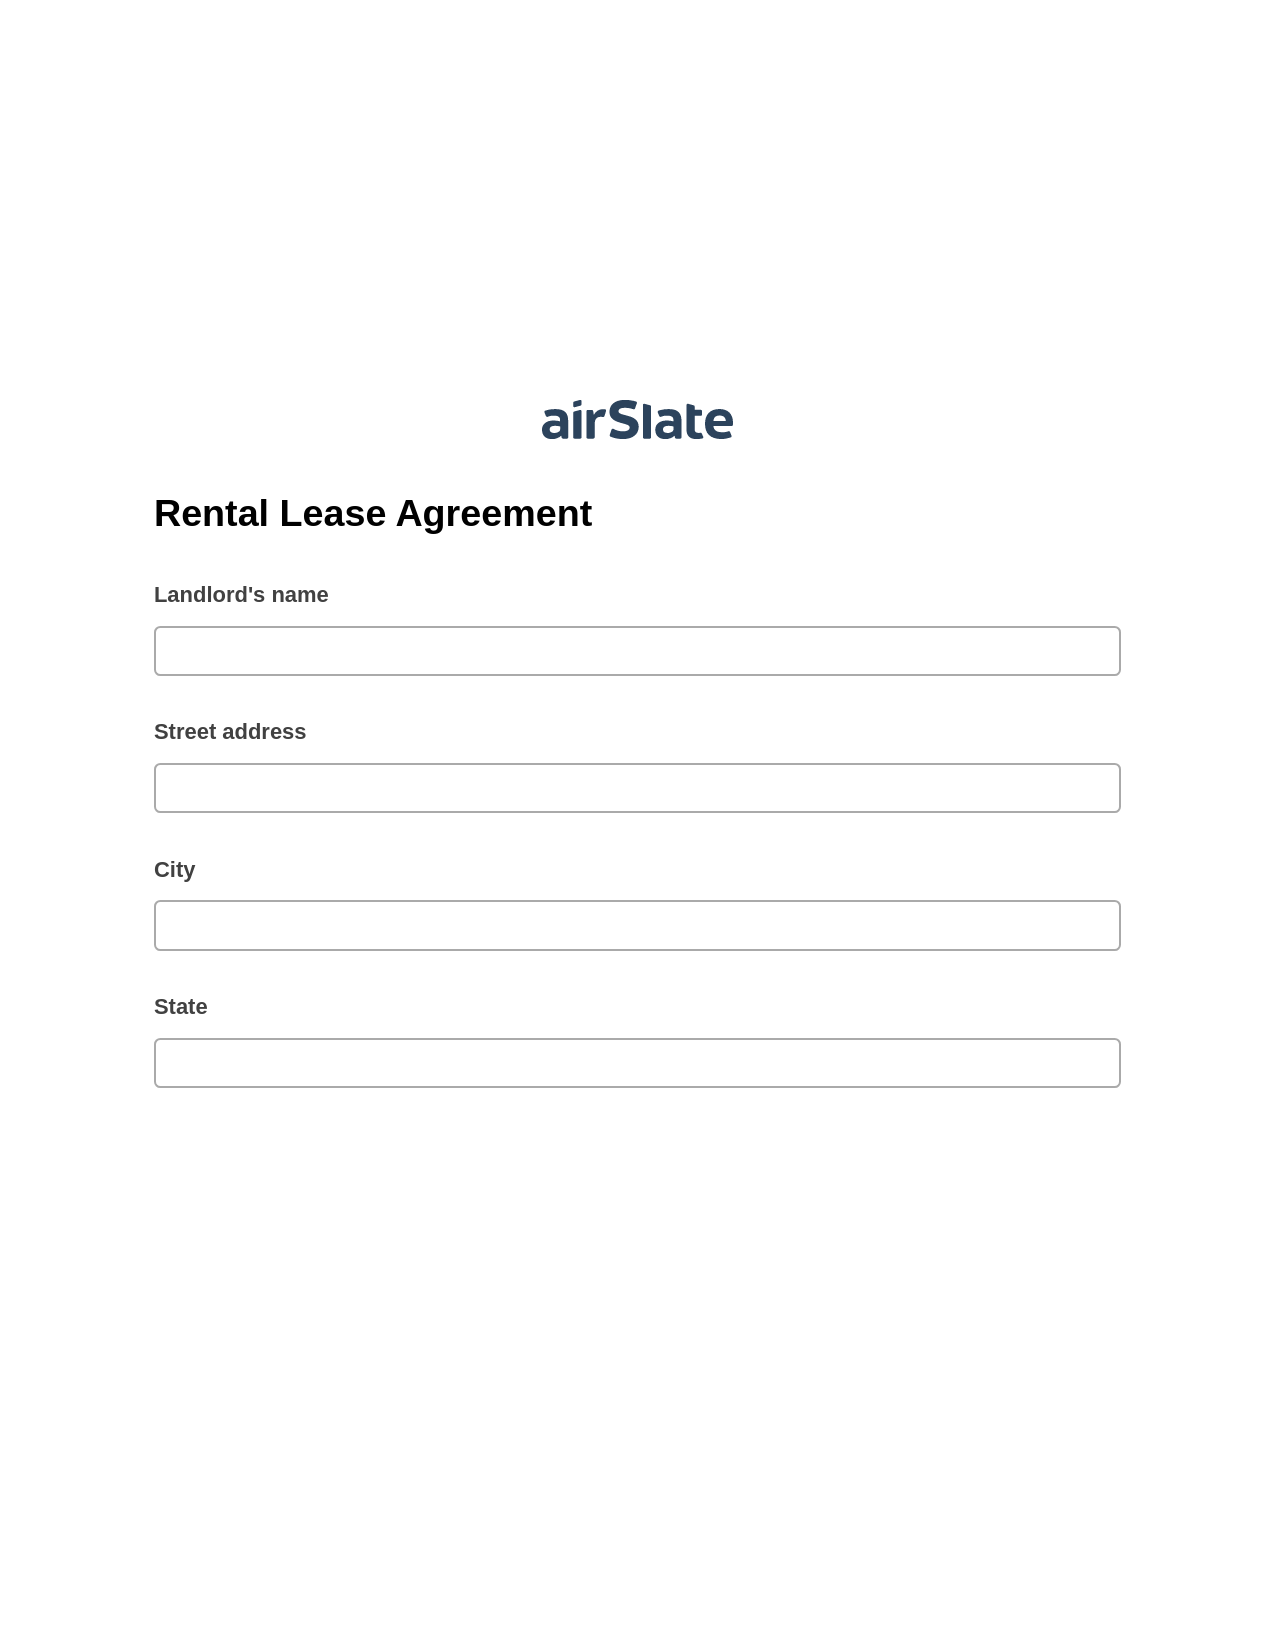 Rental Lease Agreement Pre-fill from NetSuite Records Bot, Google Calendar Bot, Export to NetSuite Record Bot